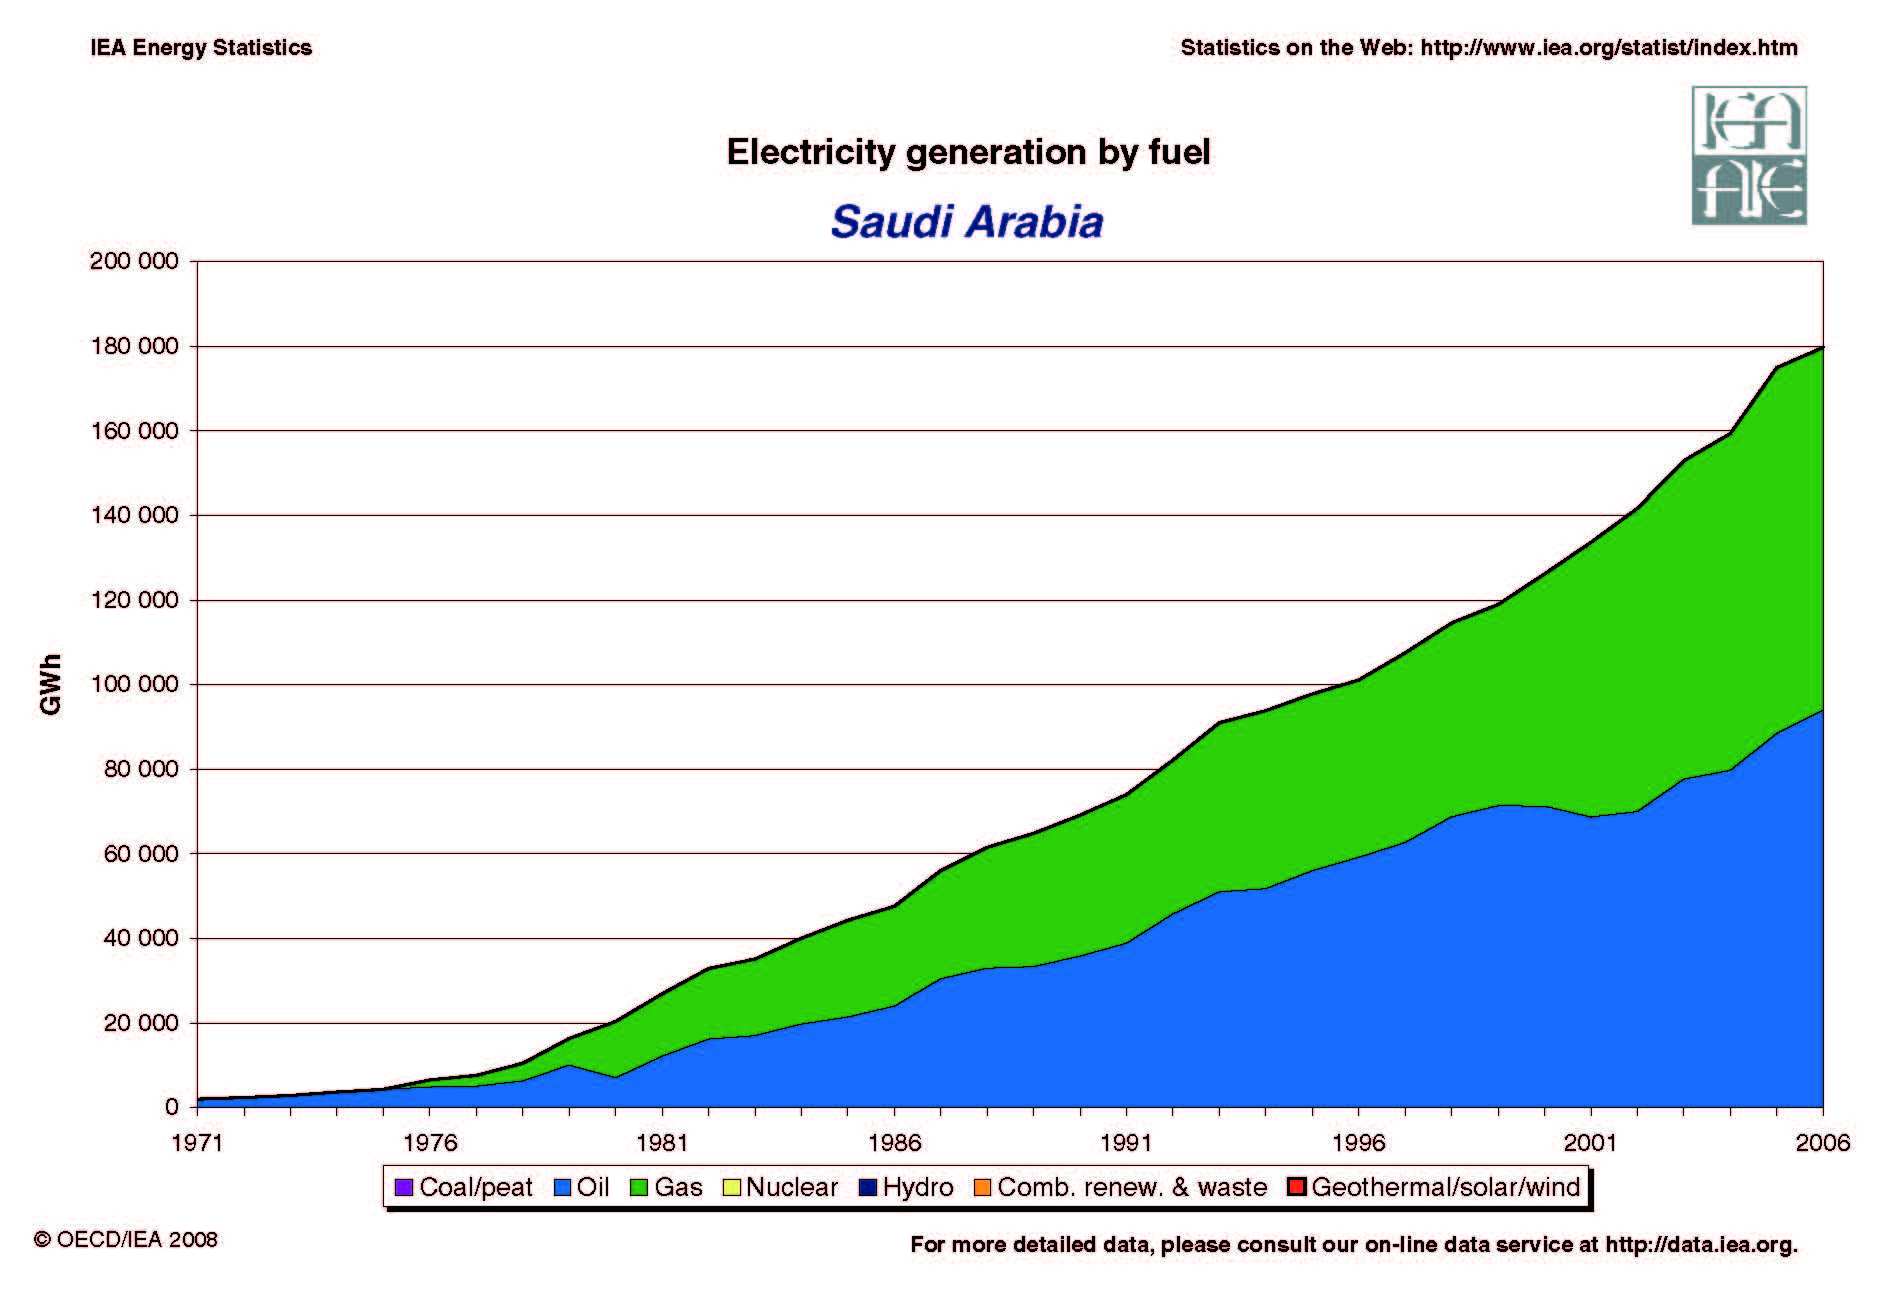 Saudi Arabia Evolution of Electricity Generation by Fuel 1971 - 2005